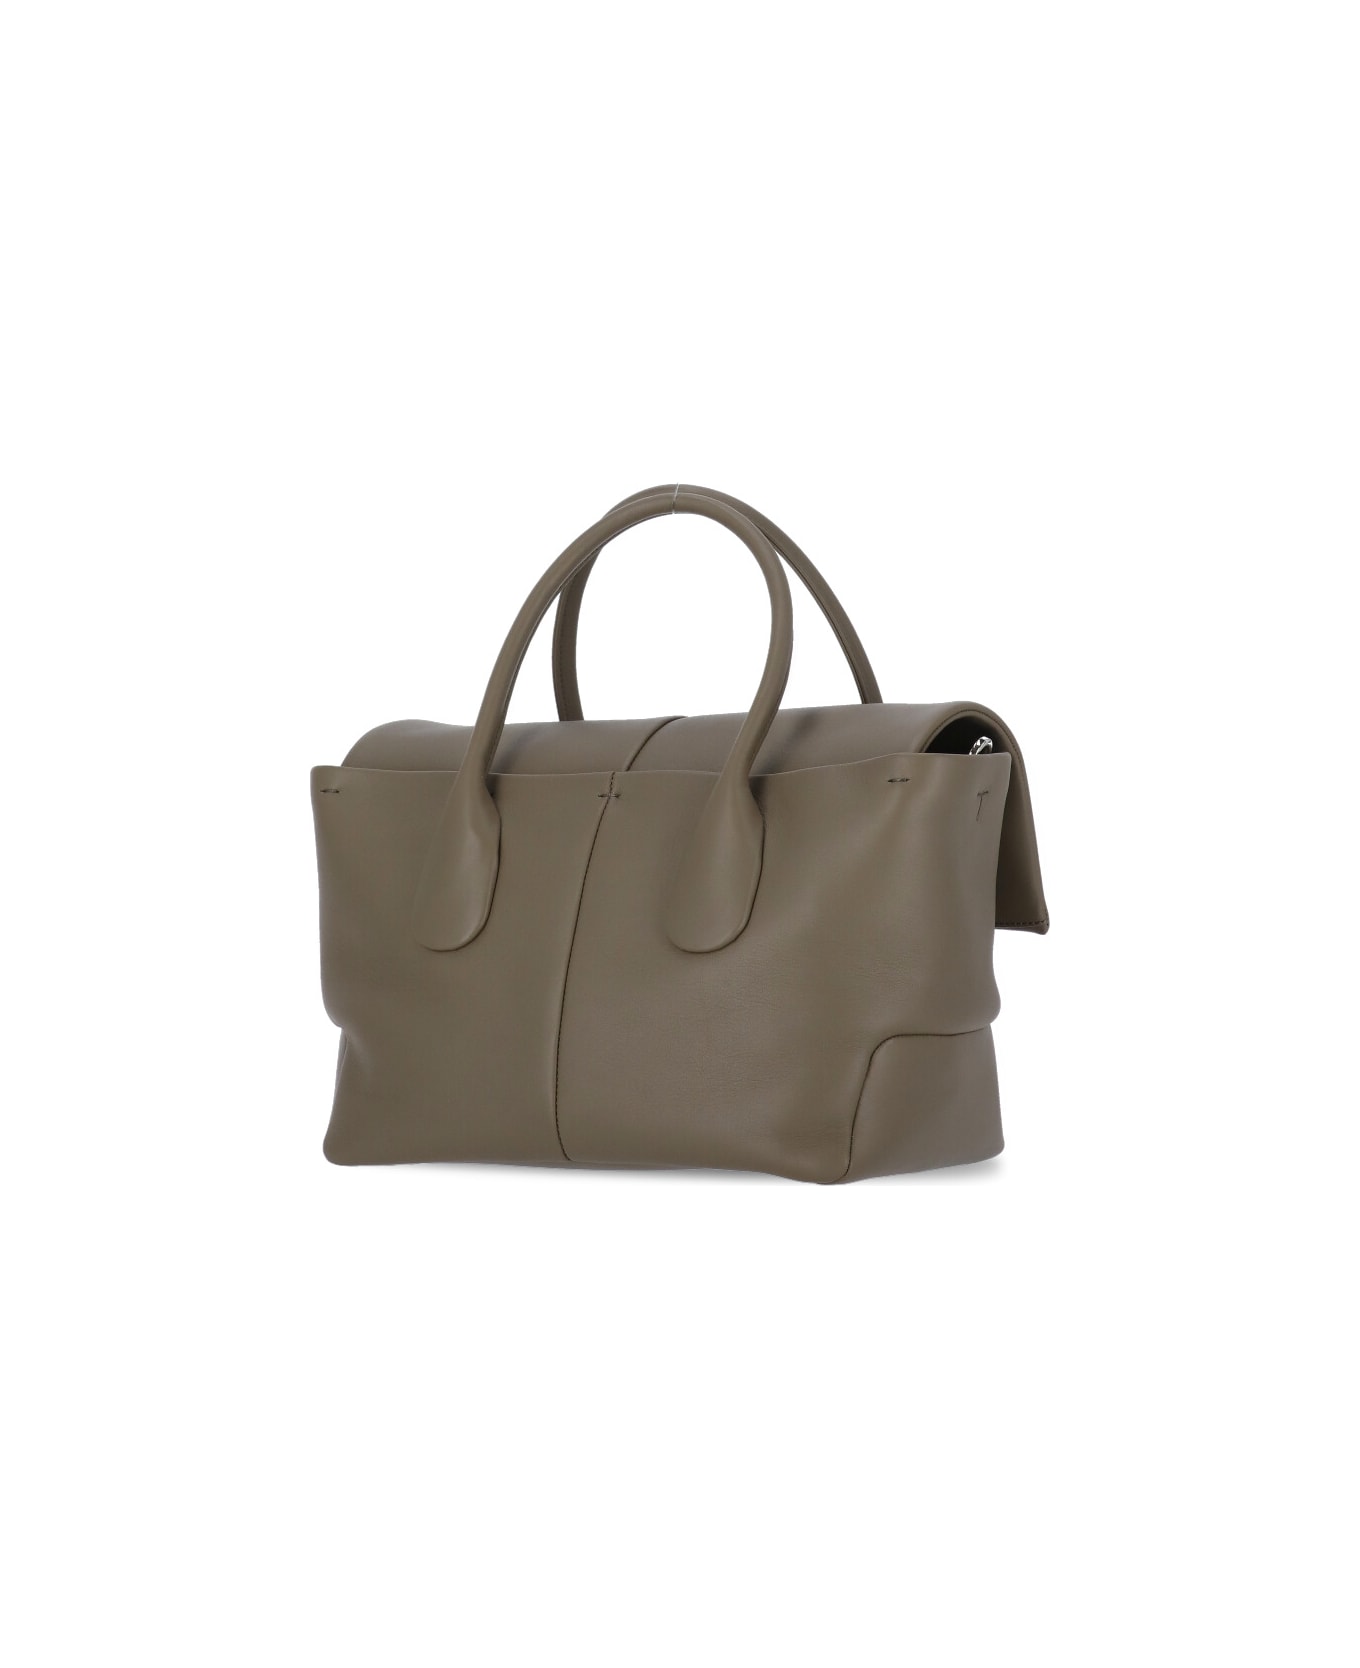 Tod's Leather Bag - Grey